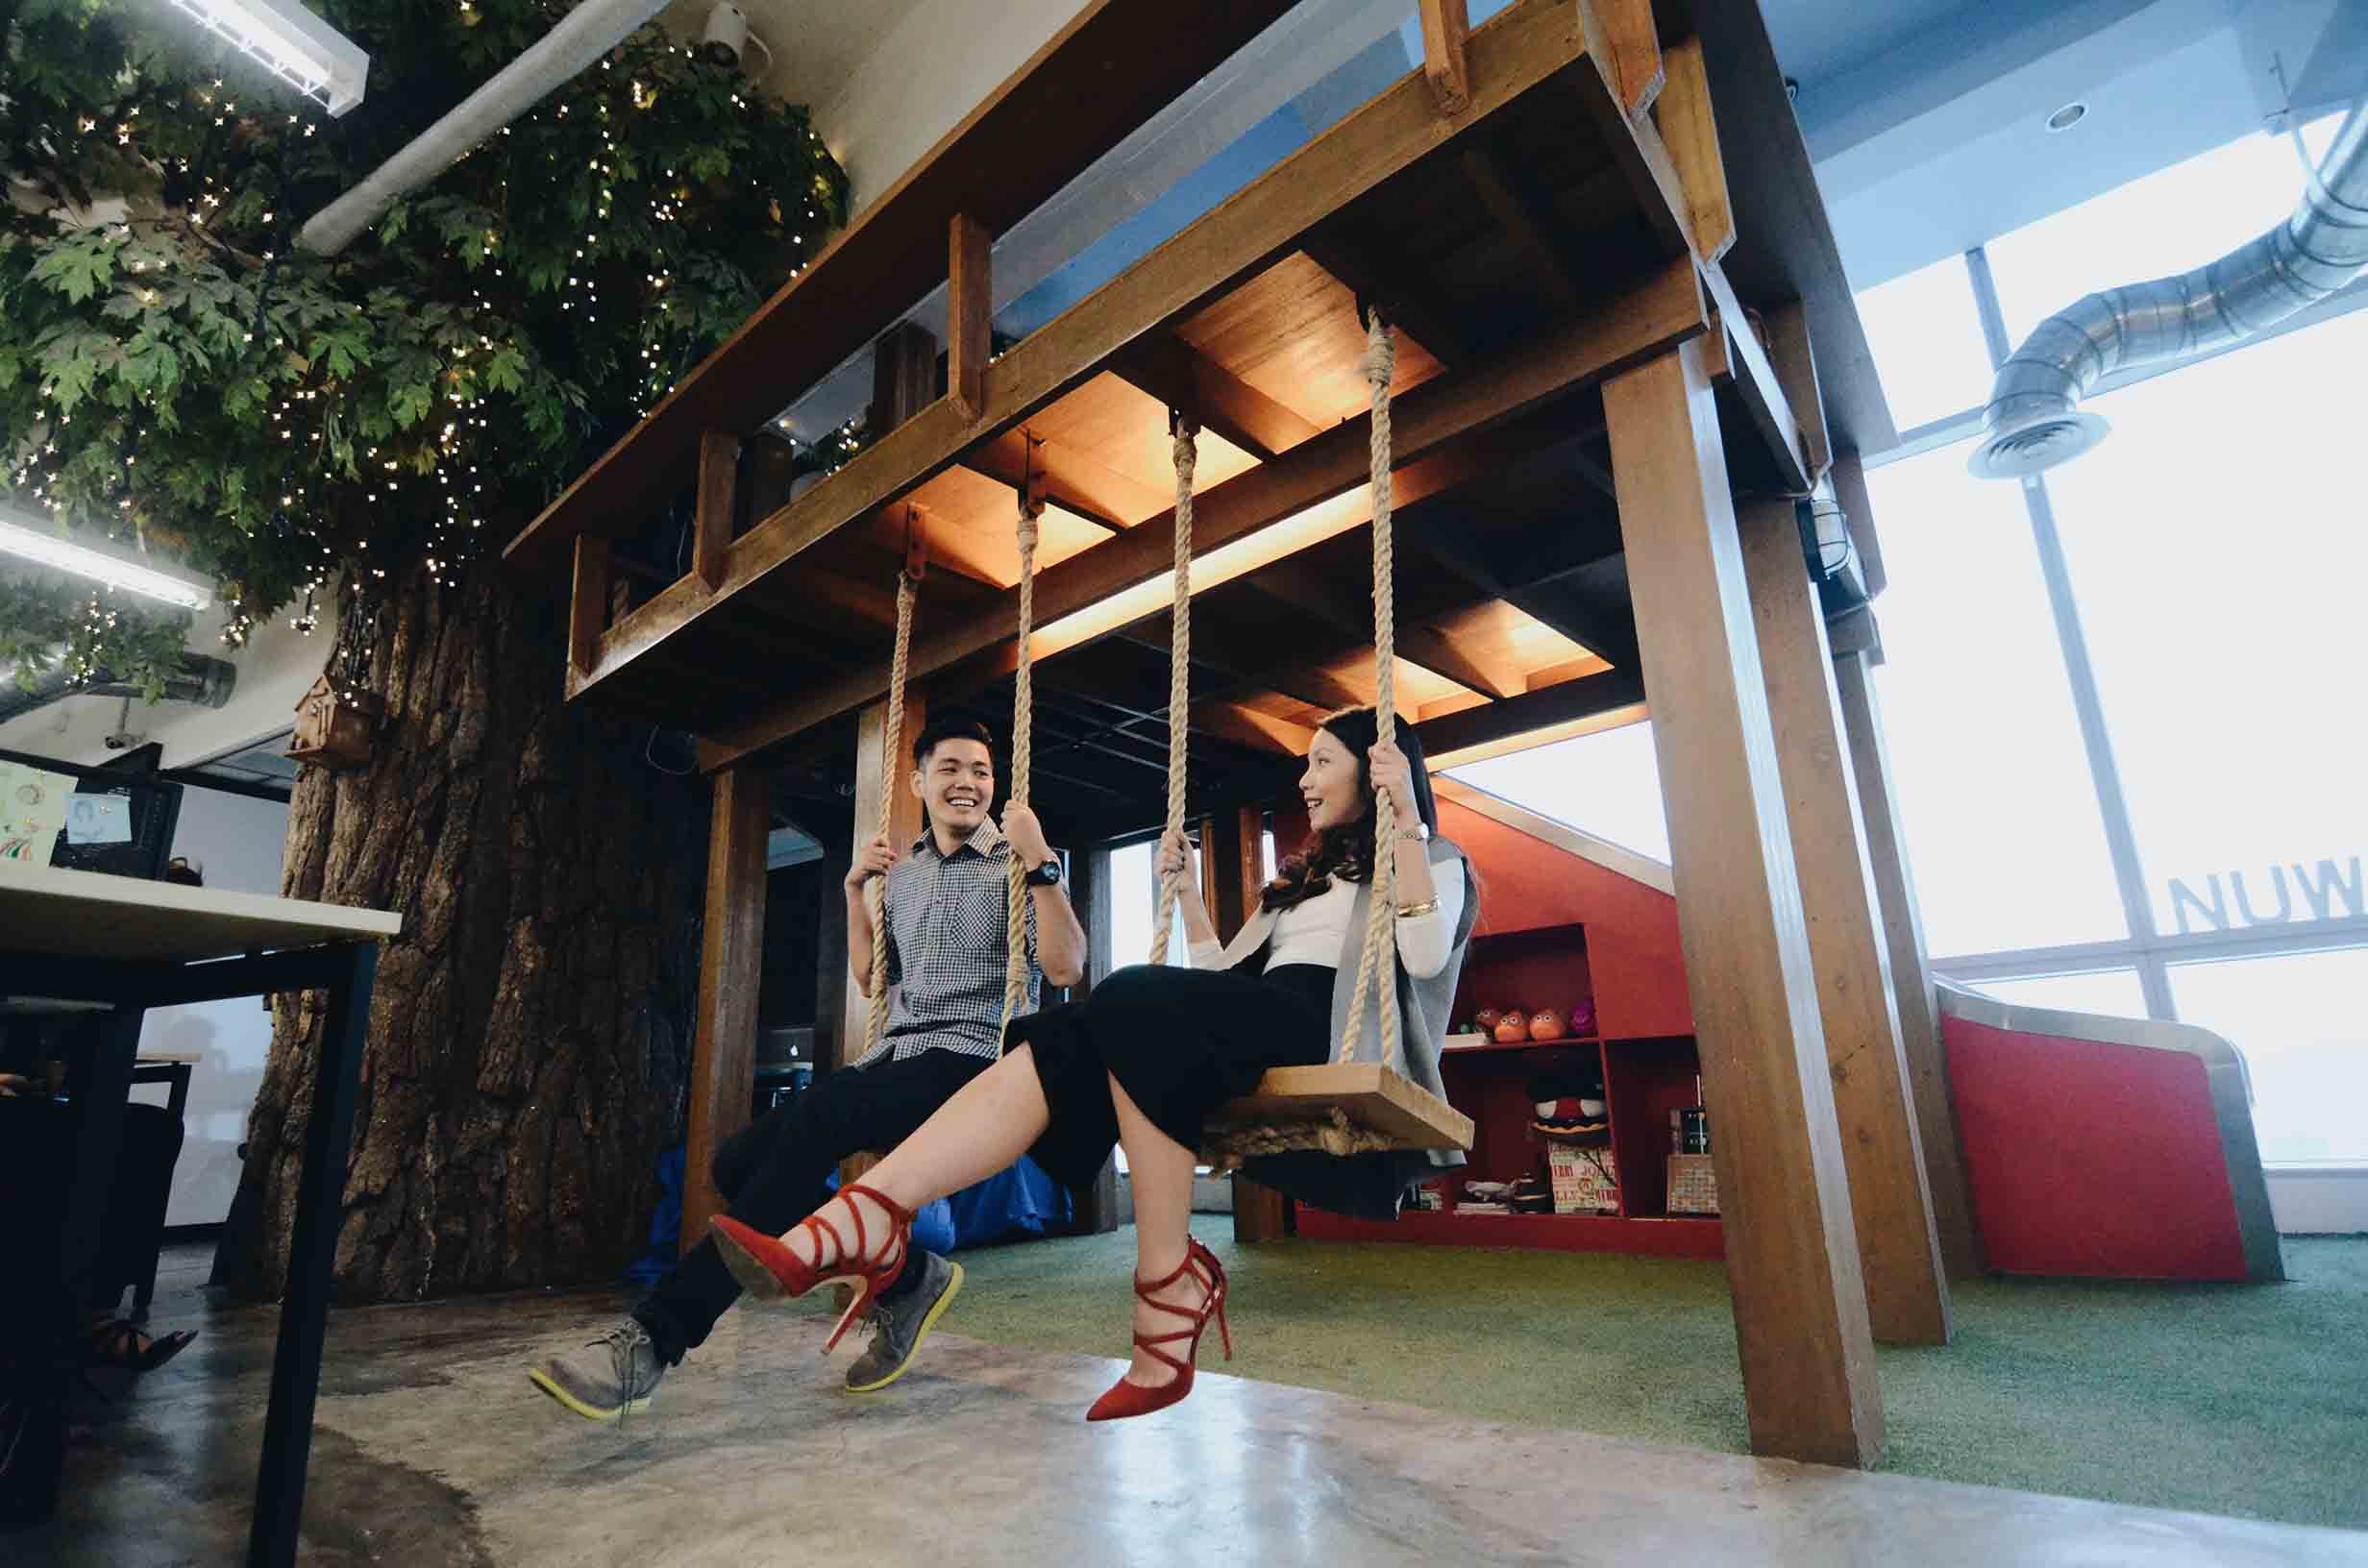 Besides a foosball table, a slide and scooters for employees to play with, there are swings where employees can simply hang around. Photo by NuWorks Interactive Labs 